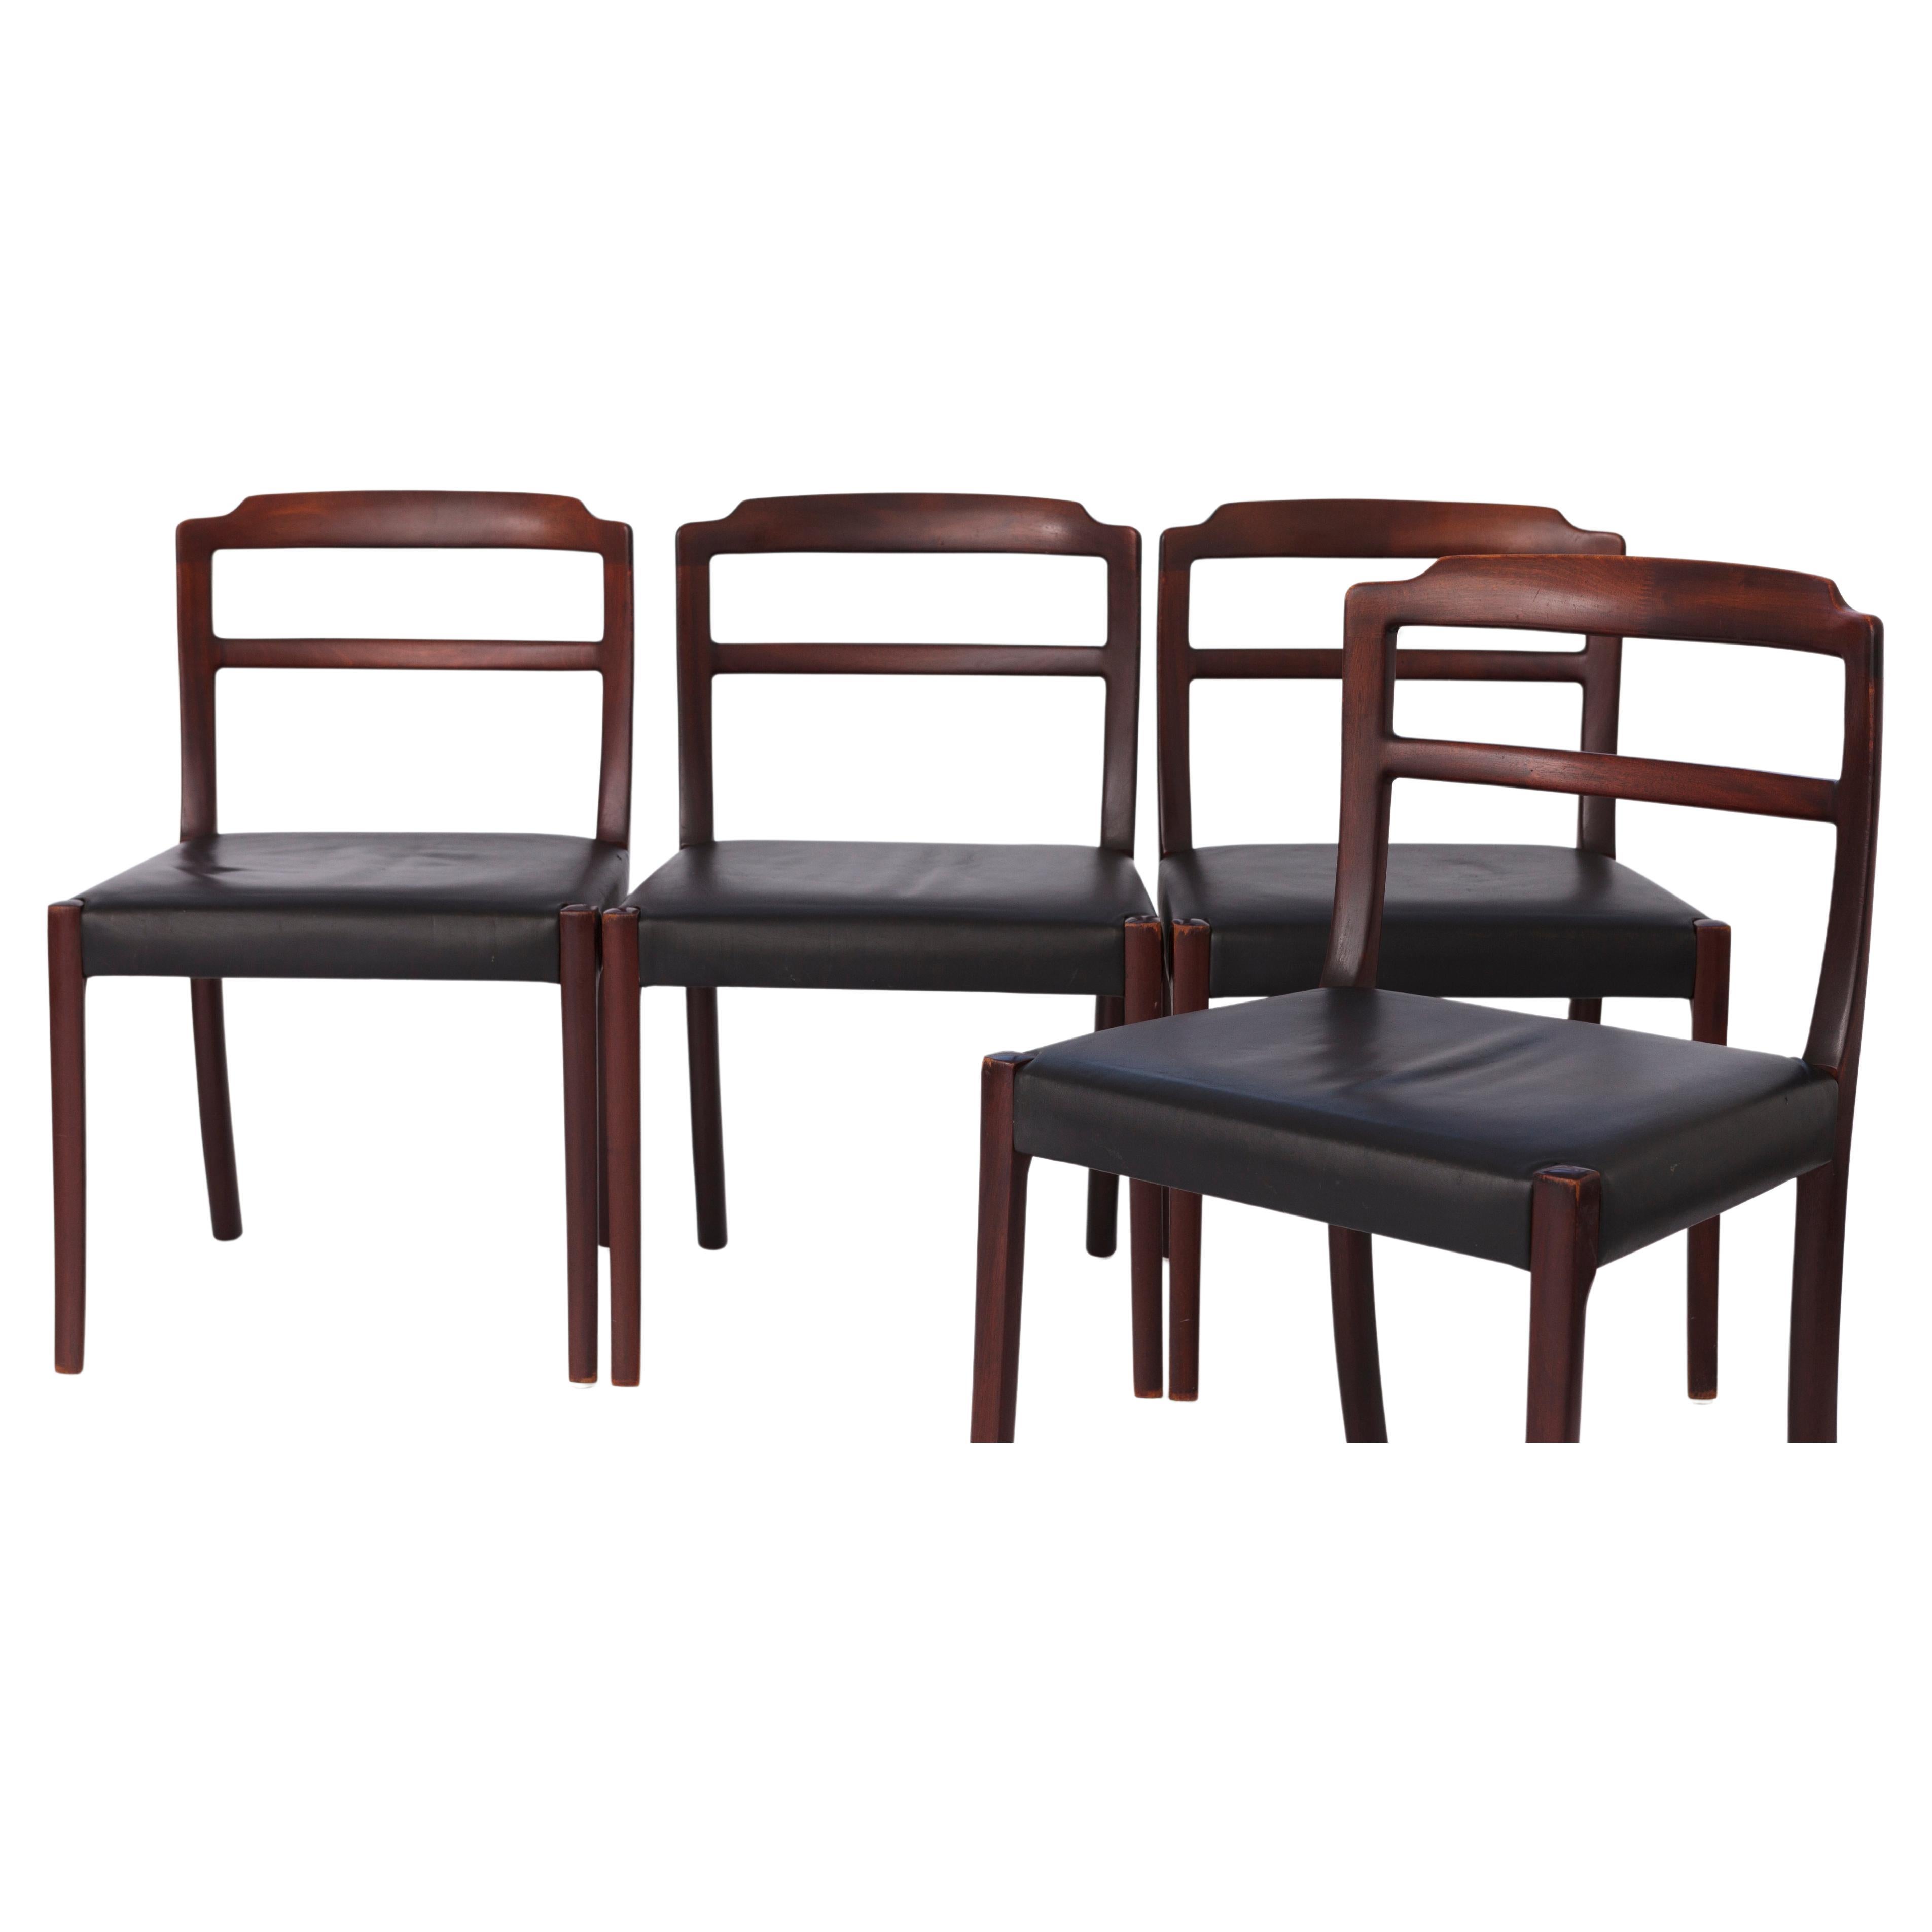 4 Vintage Chairs by Ole Wanscher, 1960s, Rosewood & Leather, Denmark For Sale